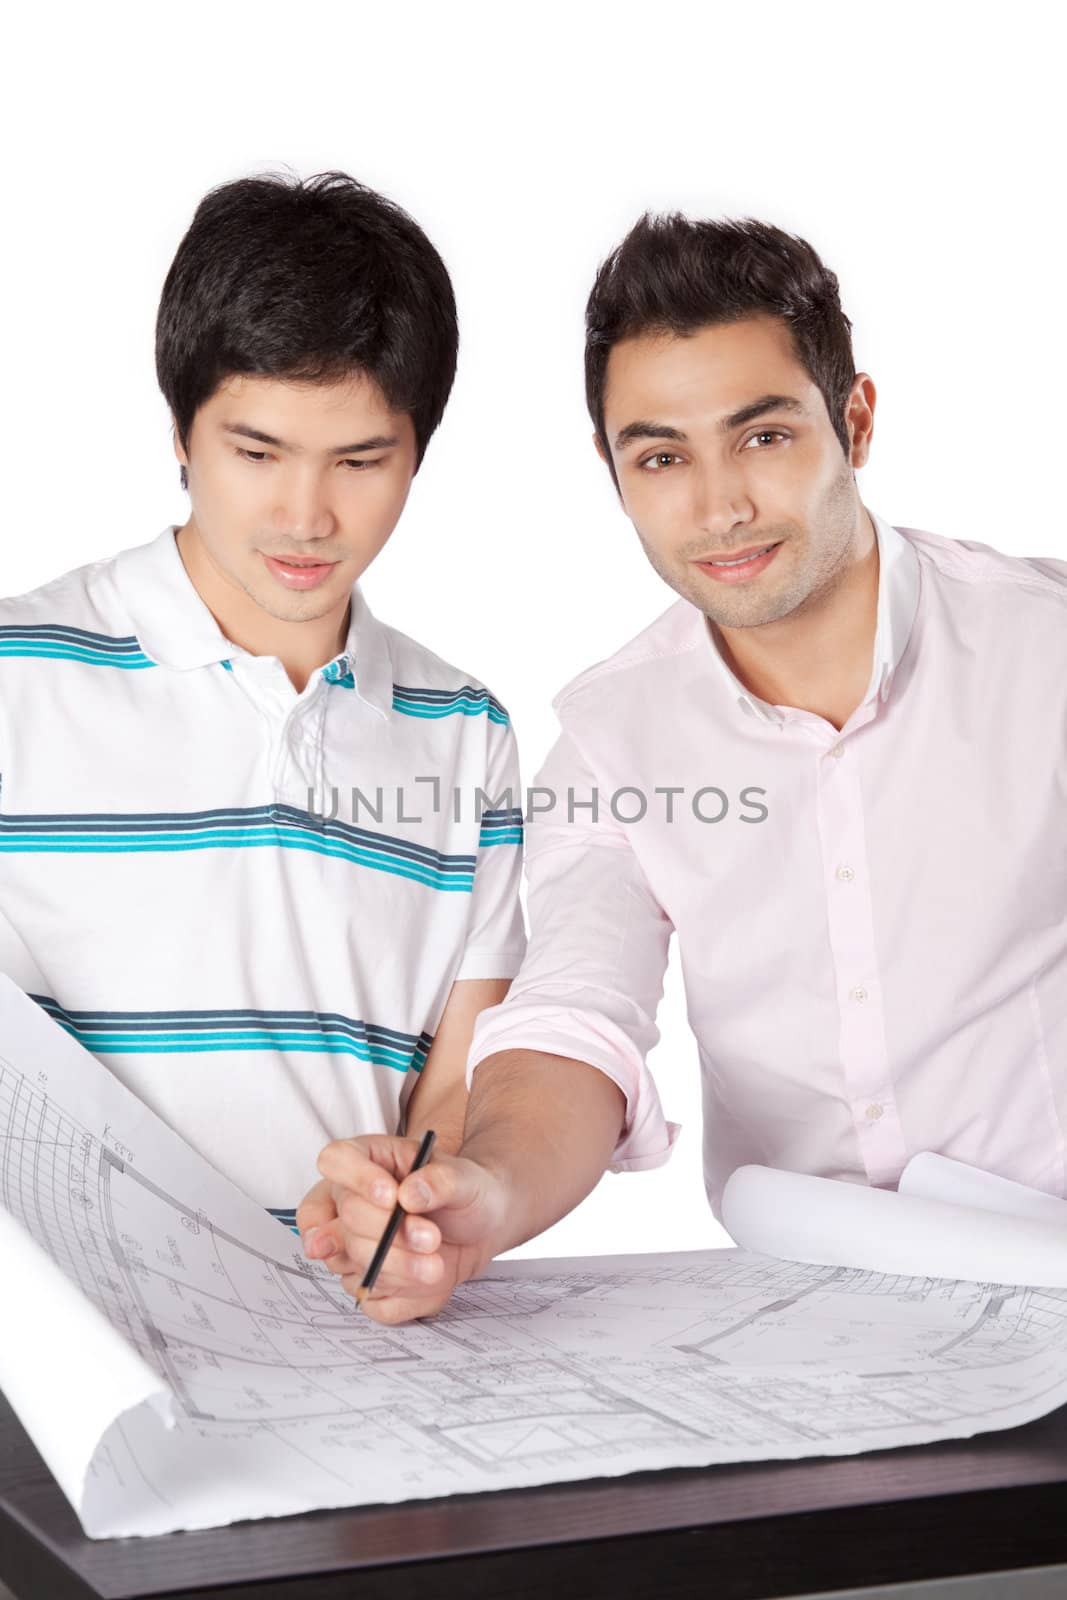 Two architects discussing on blueprints isolated on white background.